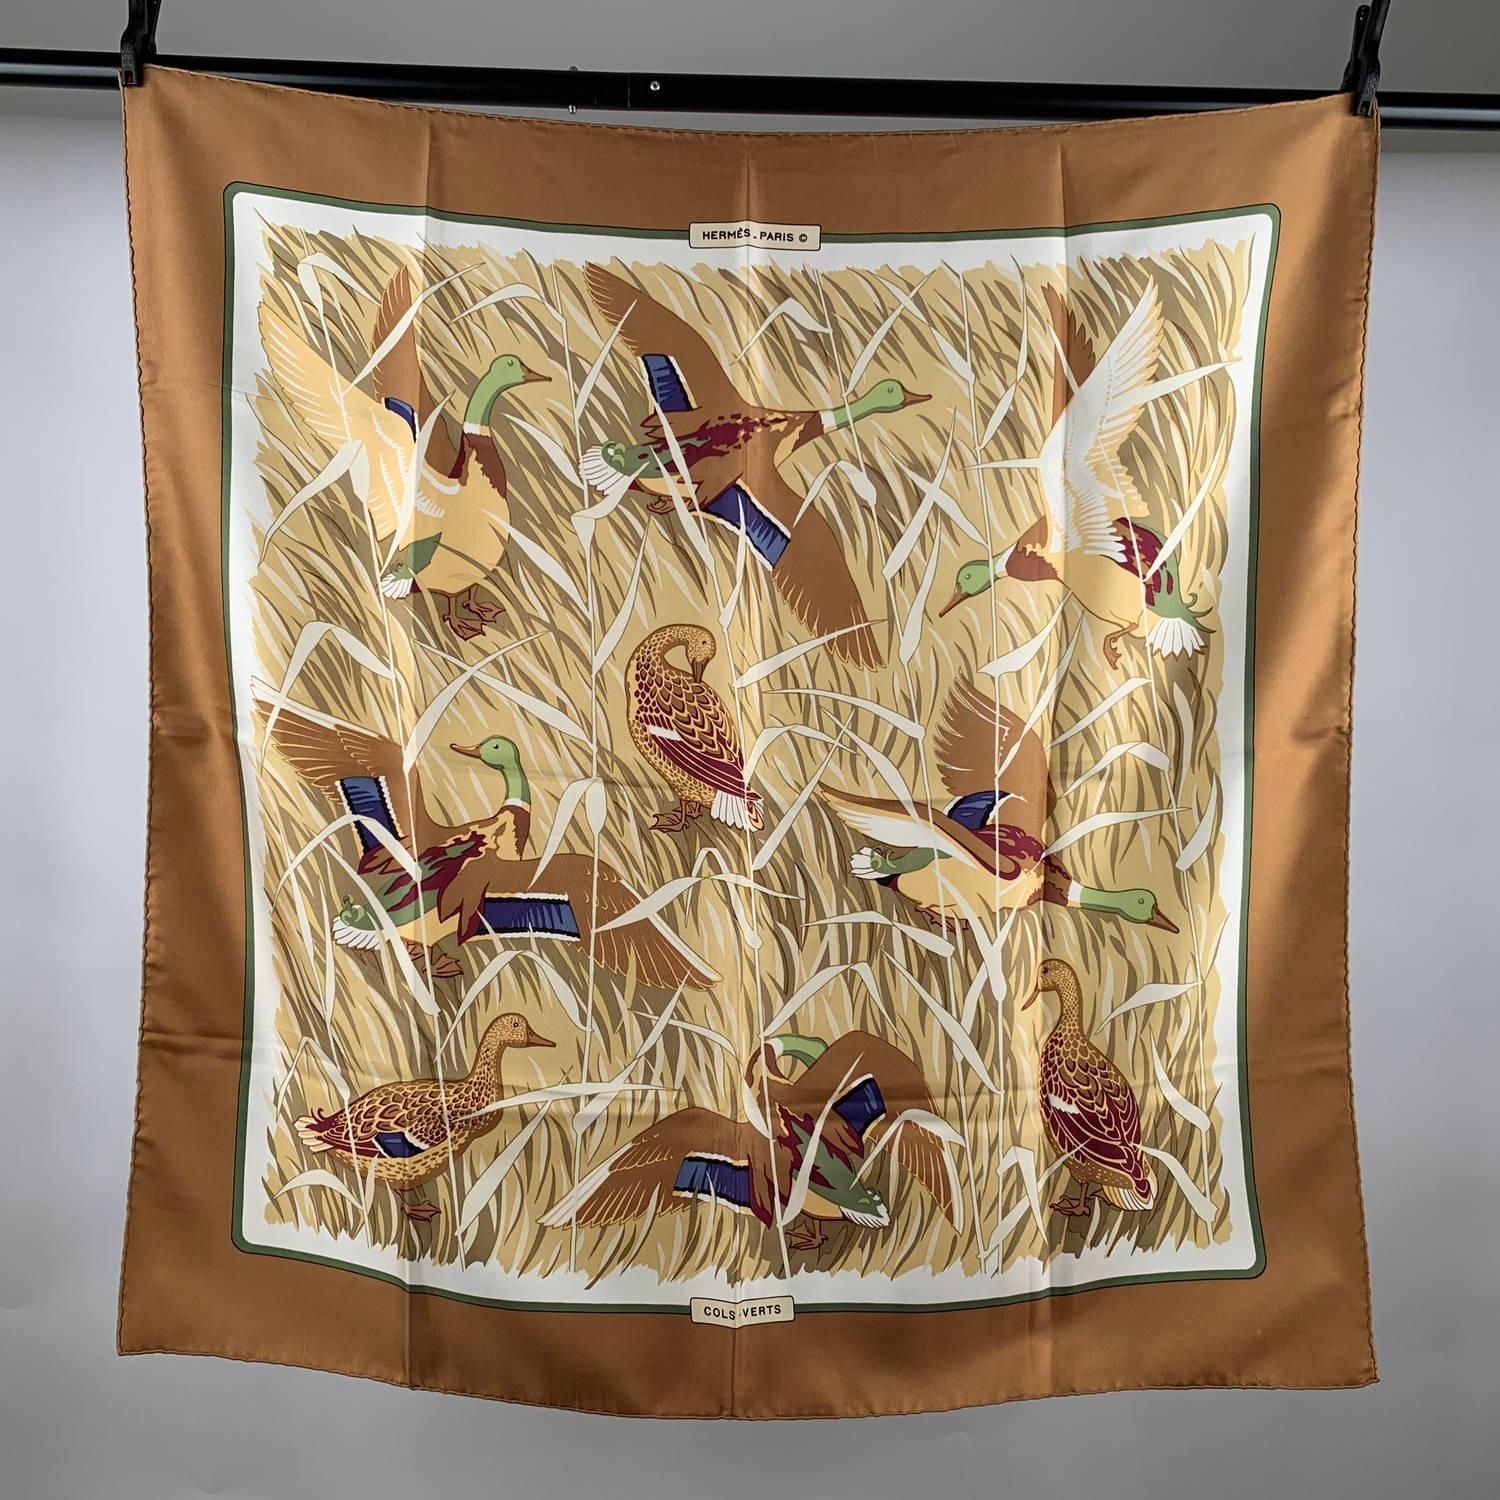 Hermes Vintage Silk Scarf Cols Verts 1973 Christiane Vauzelles

Stunning Hermes 'Cols Verts' silk scarf designed by Christiane Vauzelles and originally issued for the first time in 1973. Brown colorway. It has re-issued many times in different